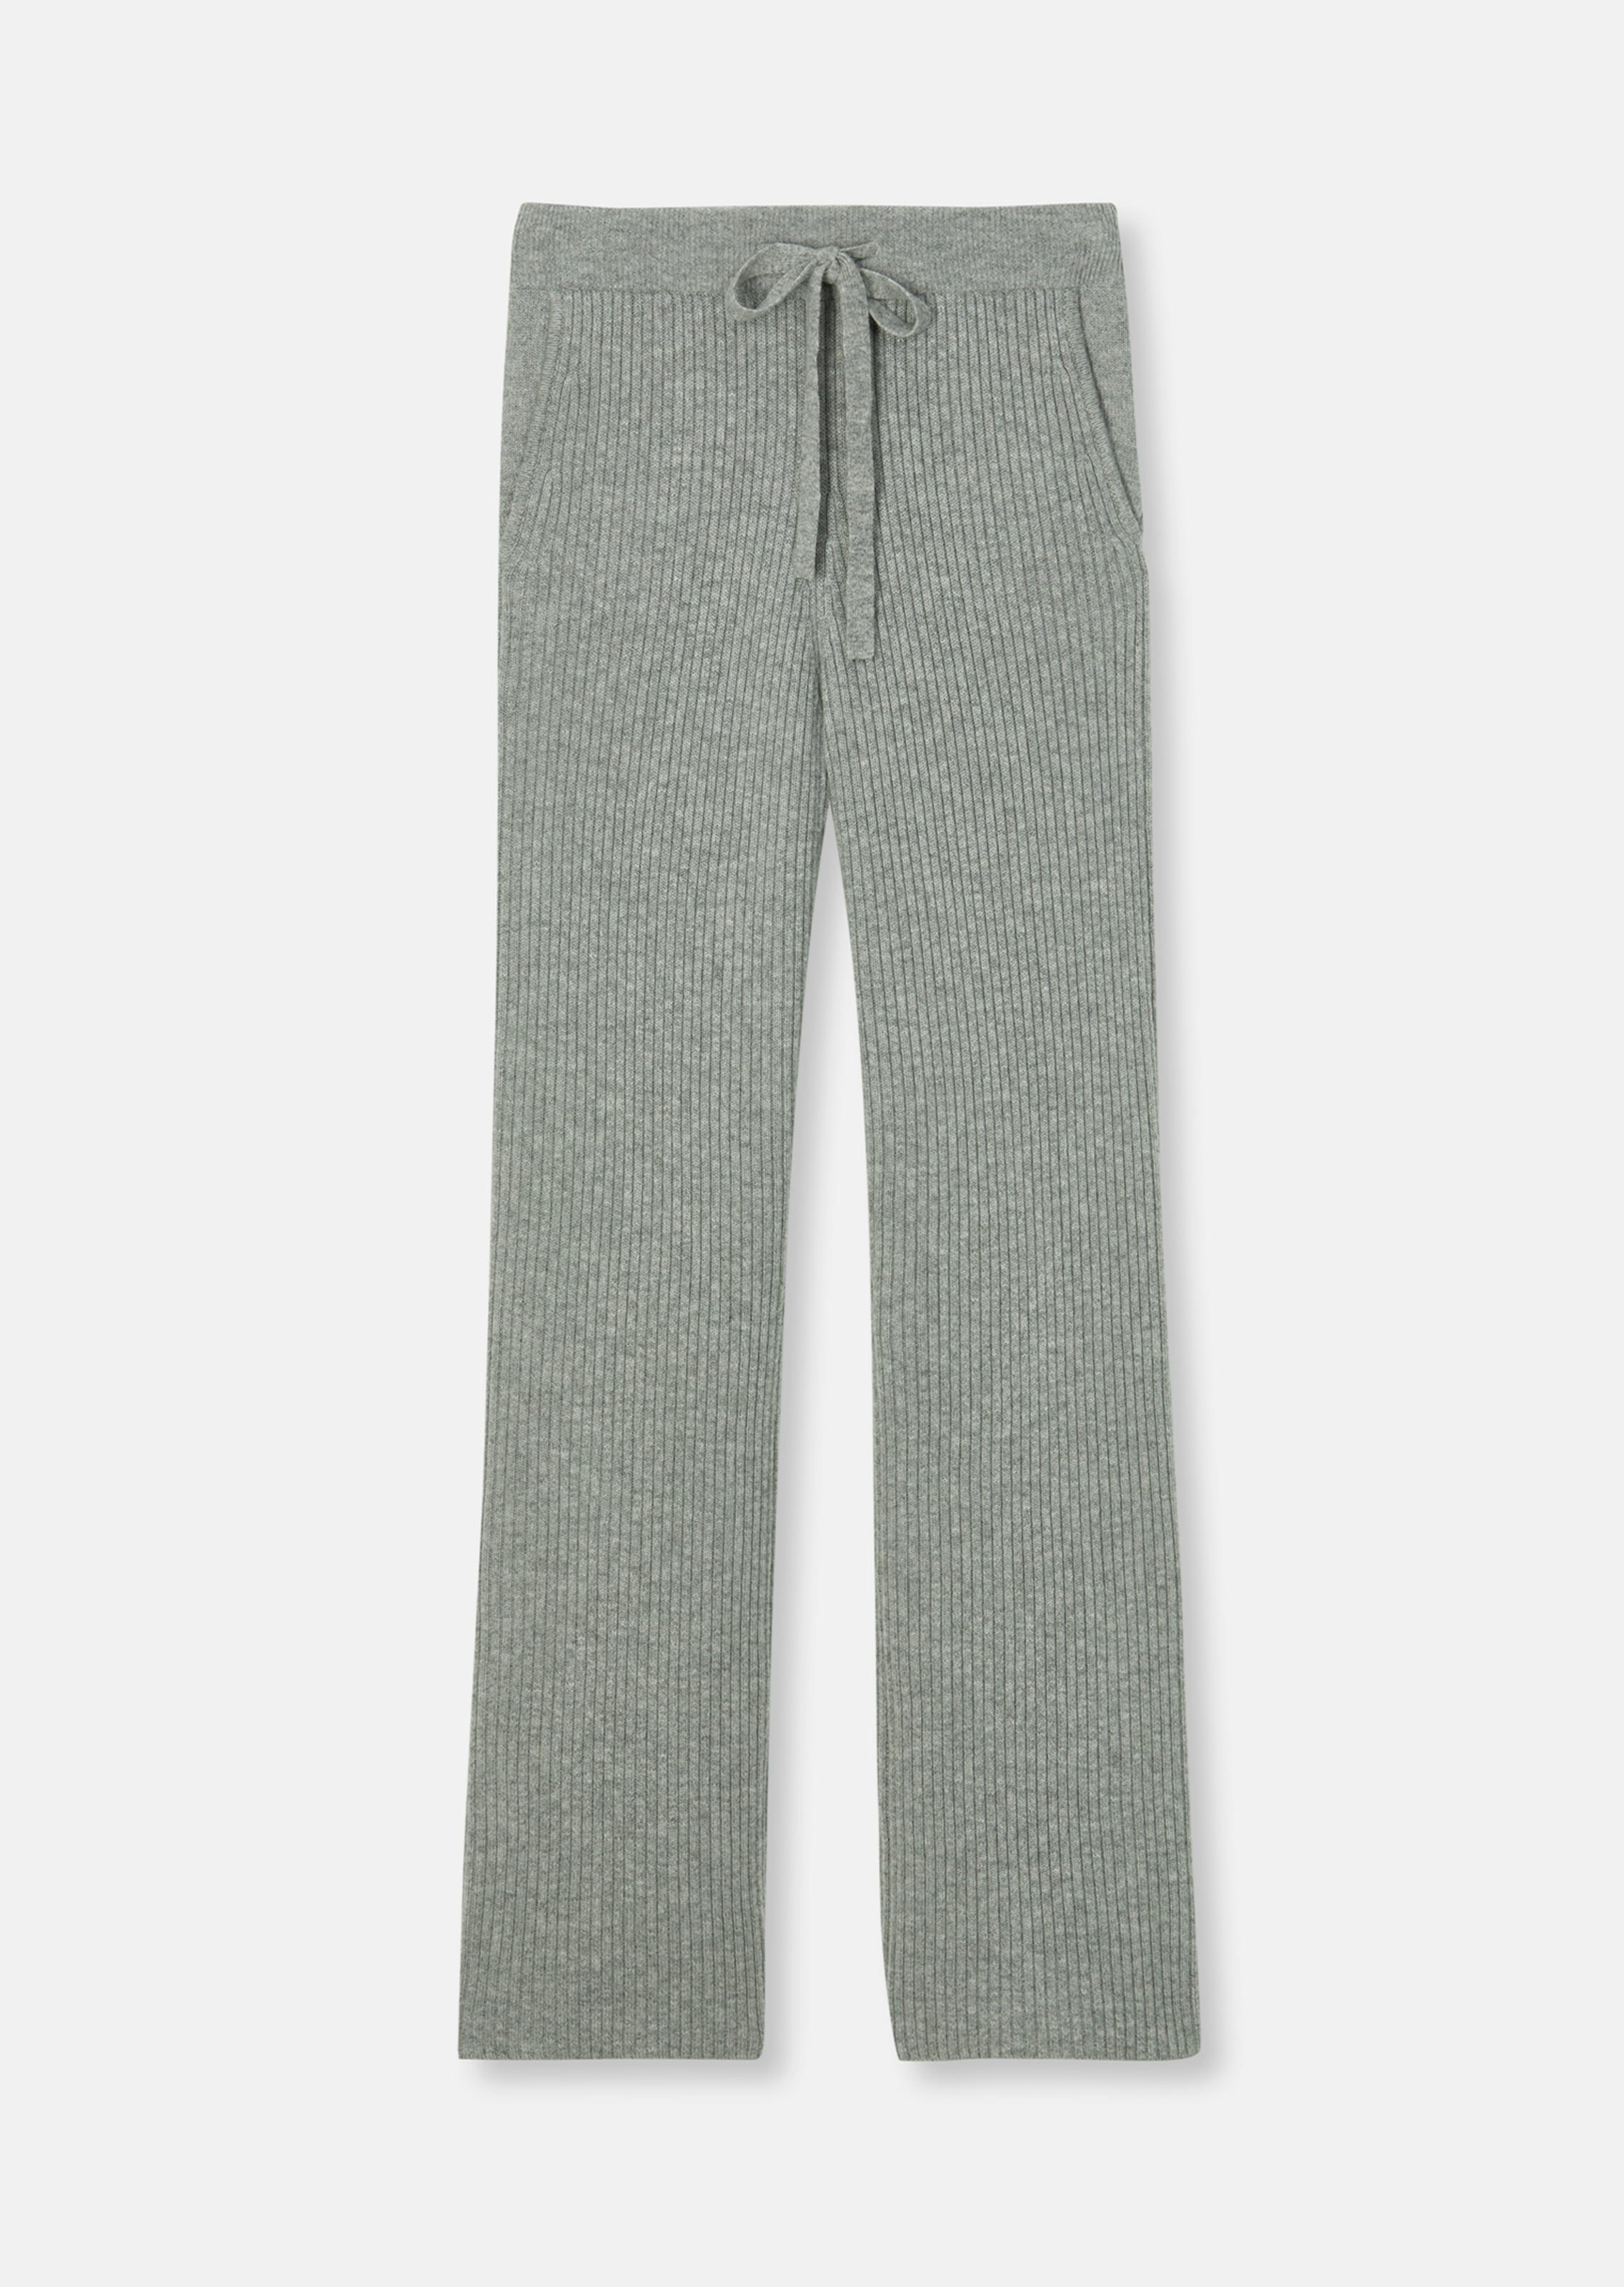 Grey Marl Knitted Wide Leg Marl Trouser | WHISTLES |